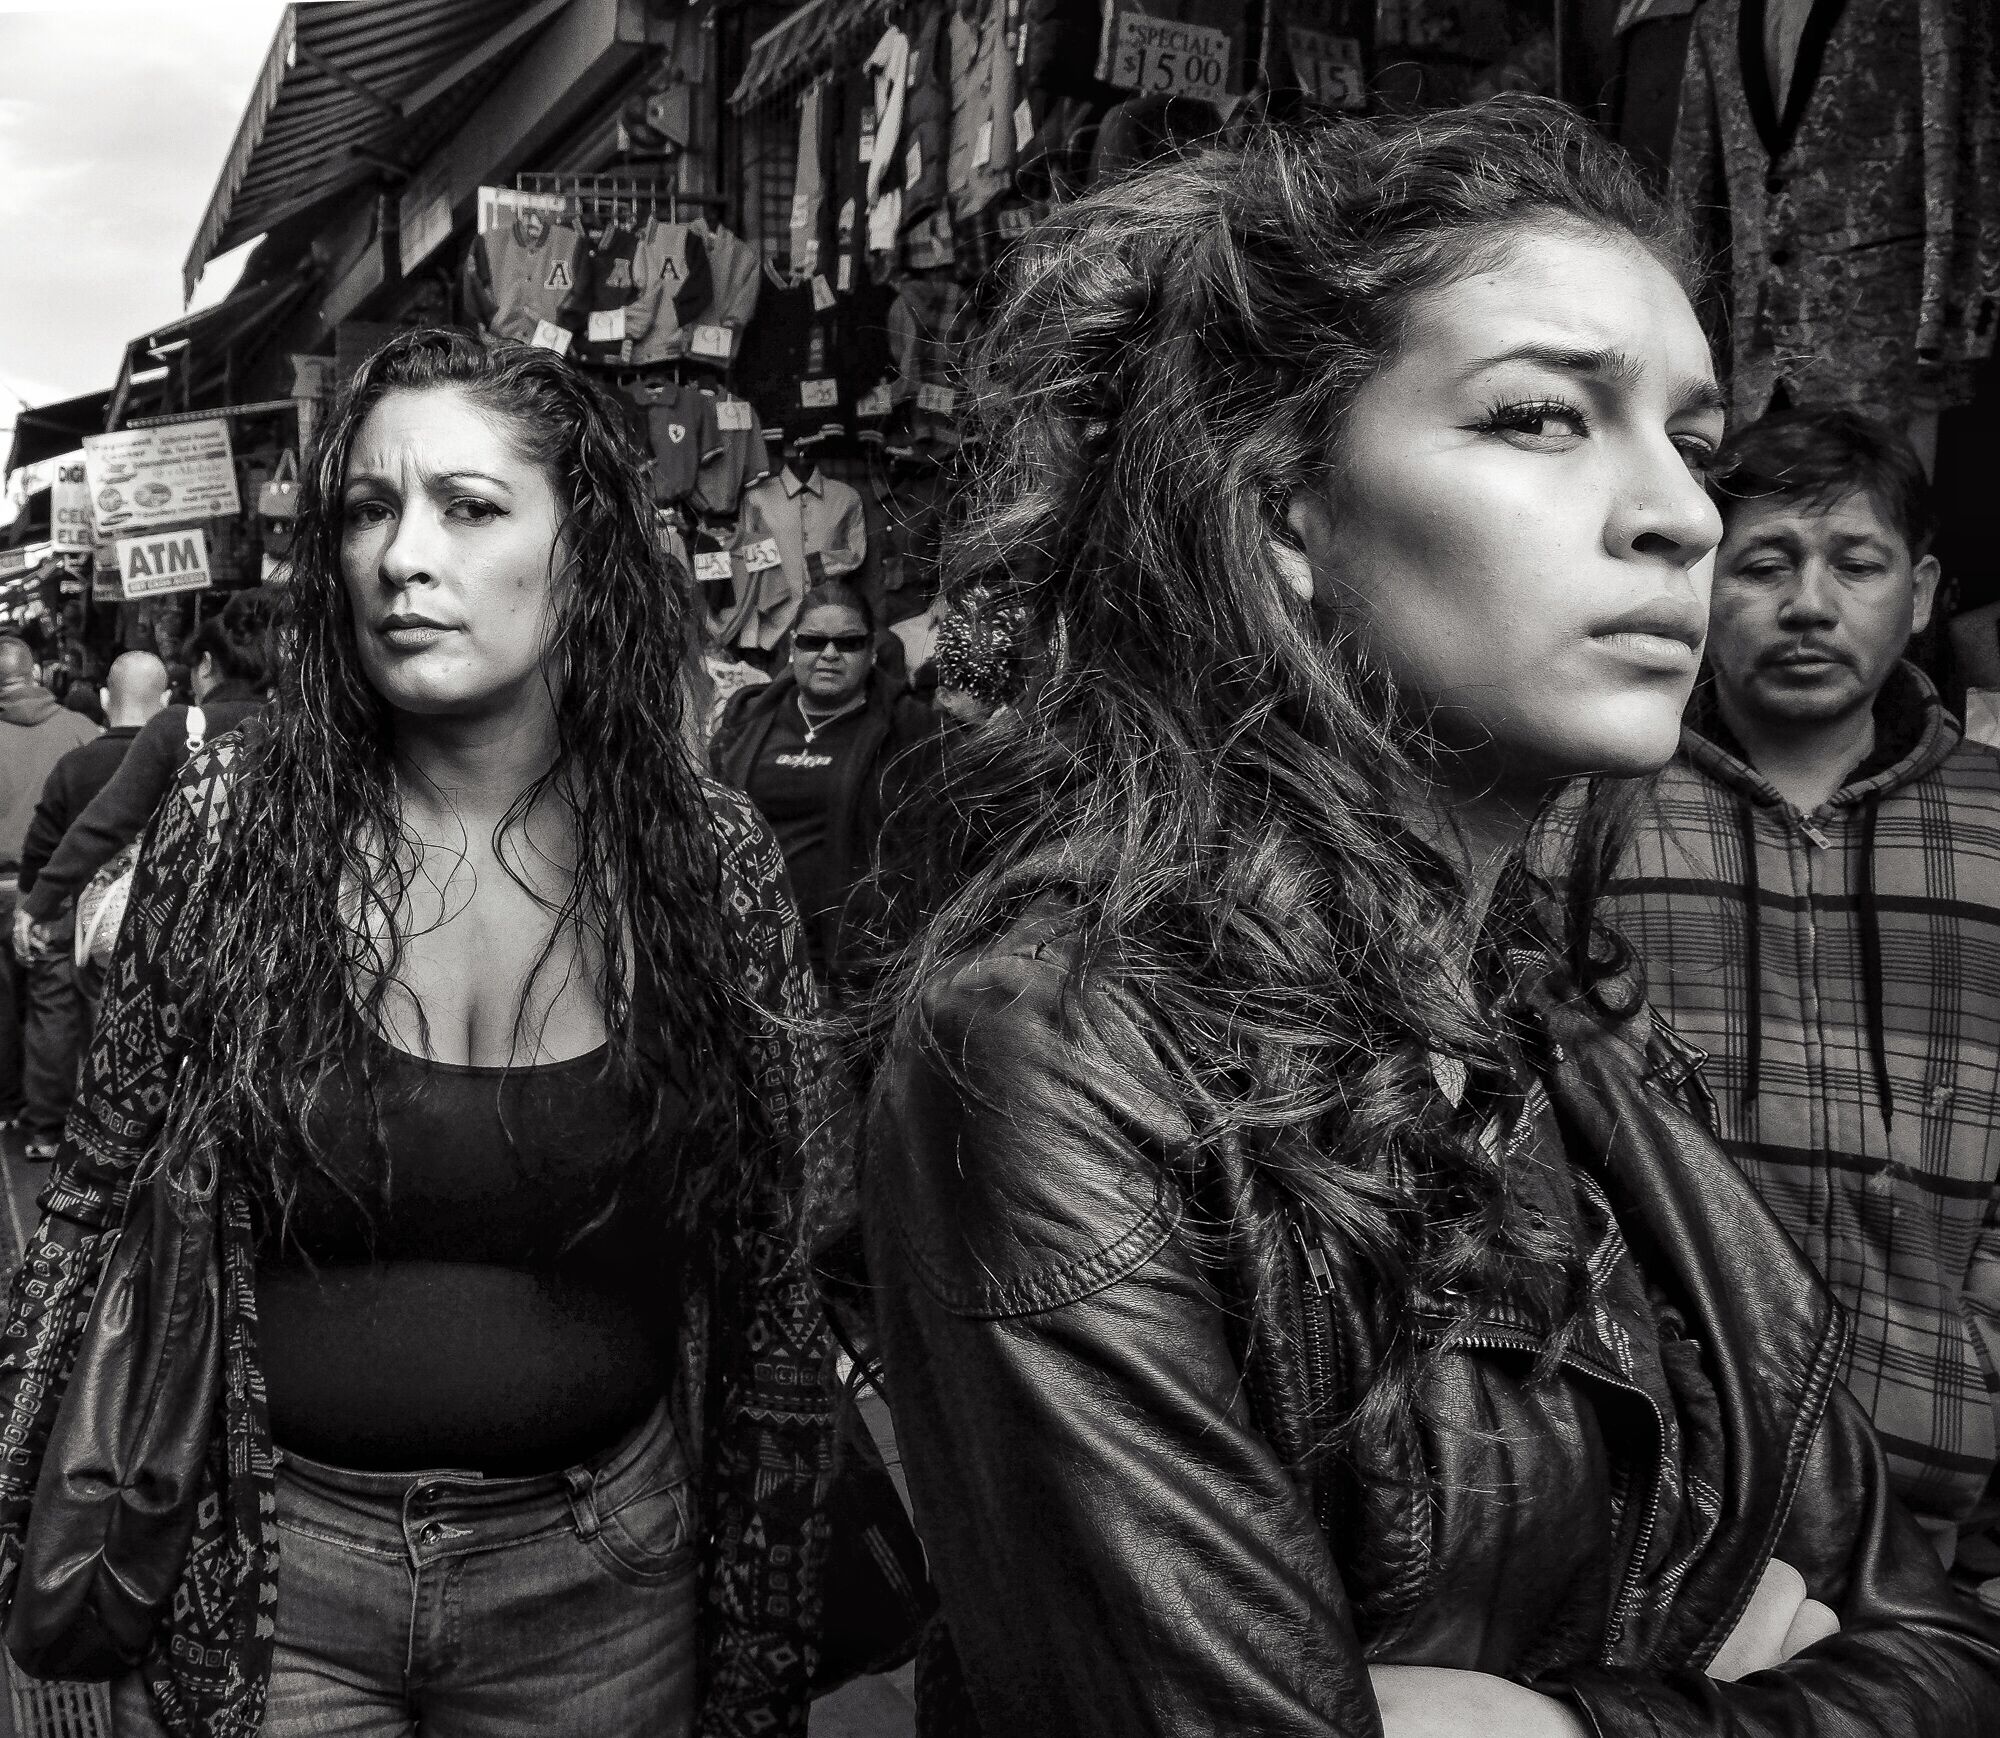 Street Photographers Share Stories Of Confrontation (And Overcoming It)